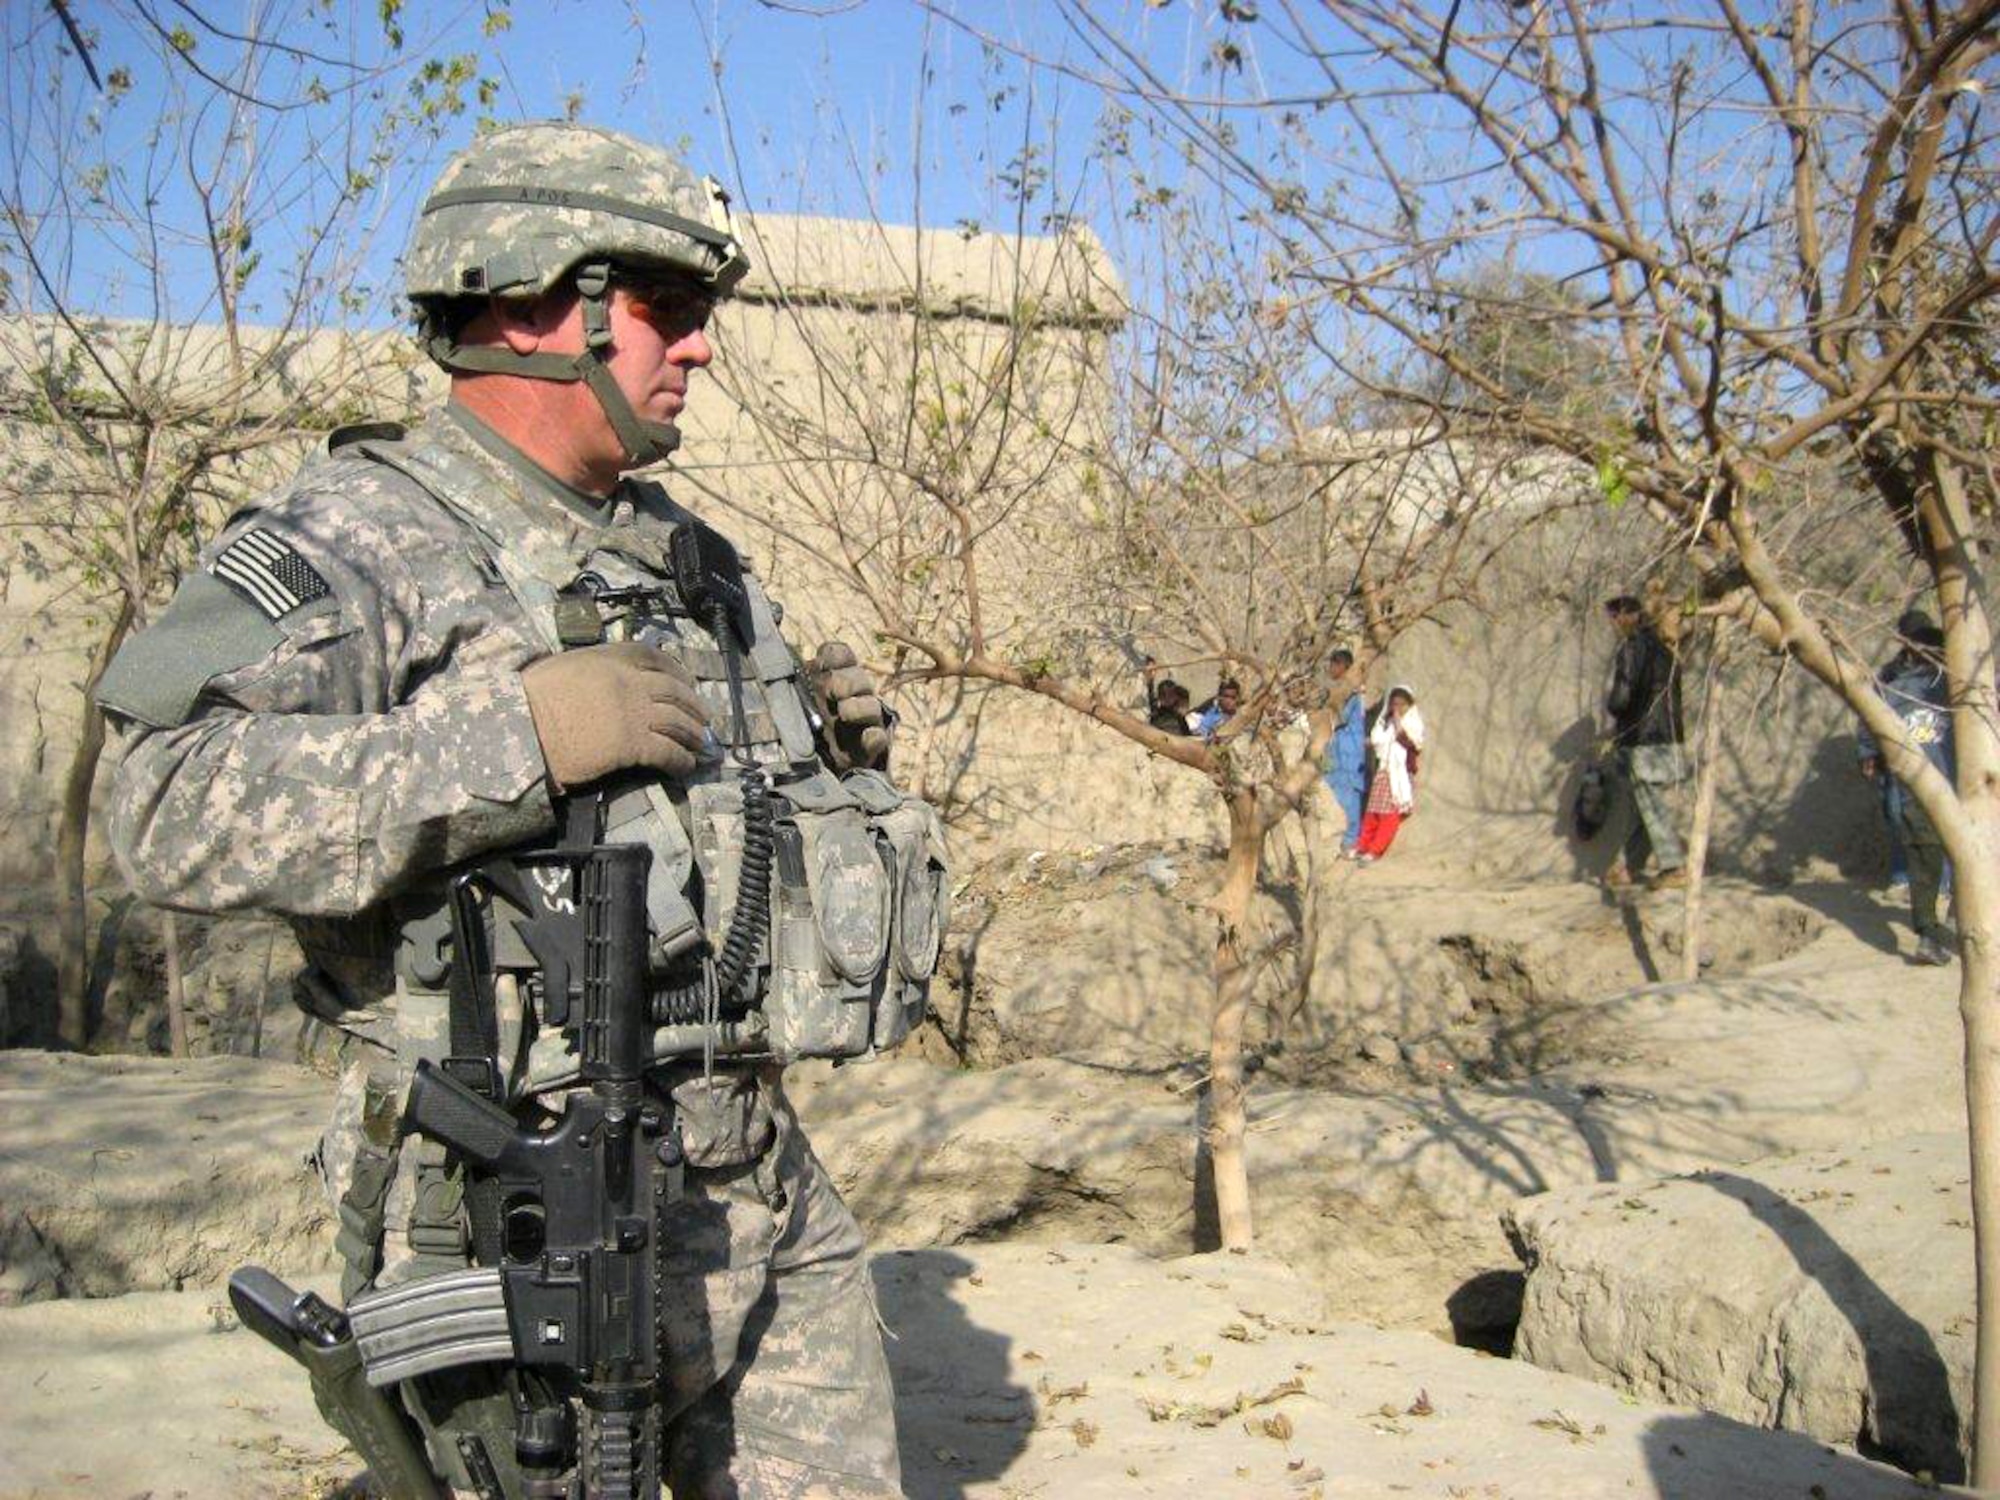 AFGHANISTAN -- Master Sgt. Robert Weber, Jr., Security Forces Platoon Sergeant, secures the Missouri Agriculture Development Team during his deployment. Sergeant Weber is a deployed  Air National Guard member from the 131st Bomb Wing.